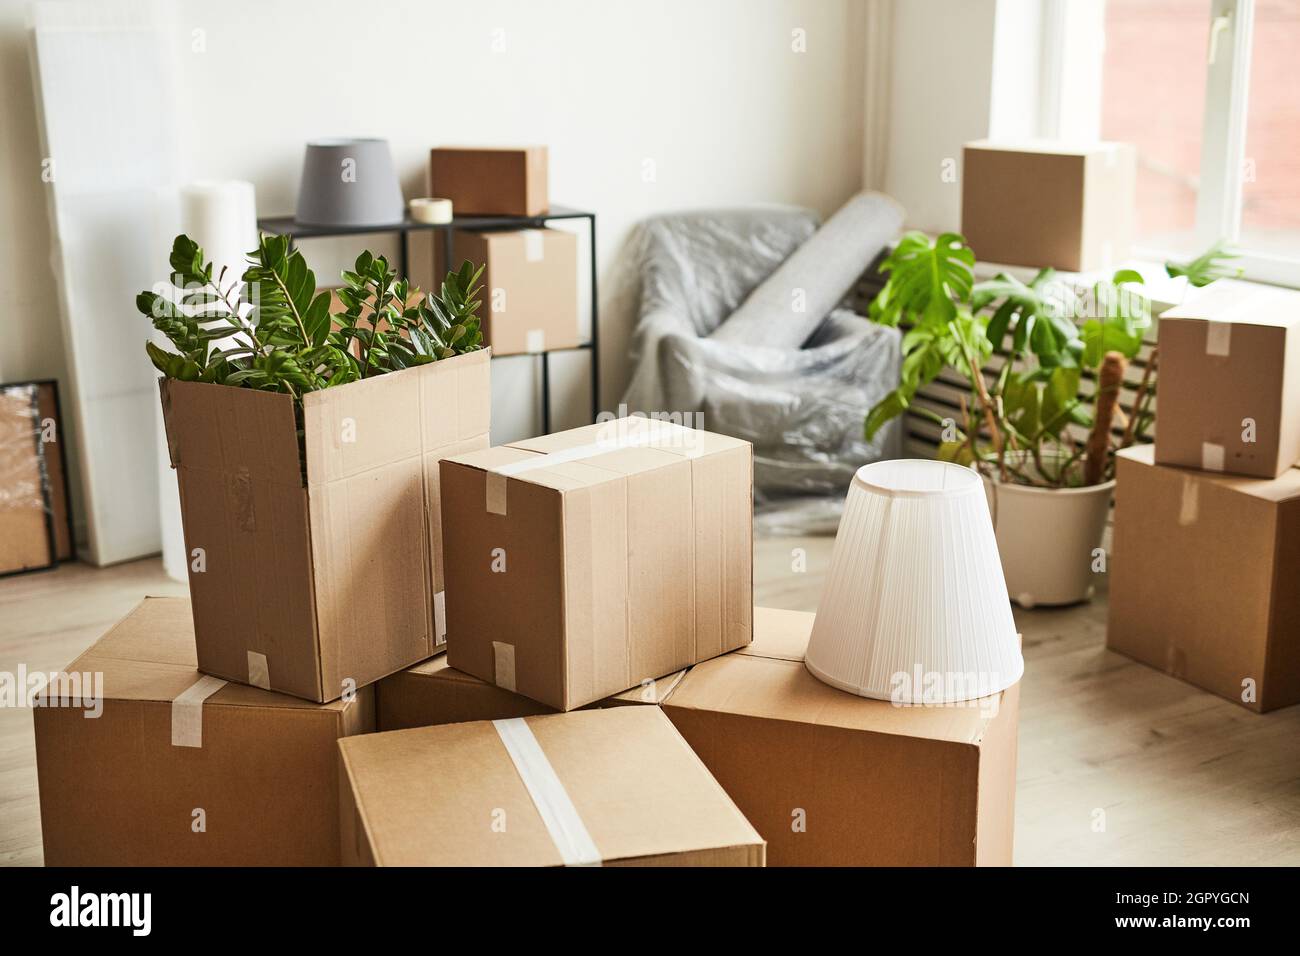 Background image of cardboard boxes in empty room with plants and furniture, moving to new home concept, copy space Stock Photo